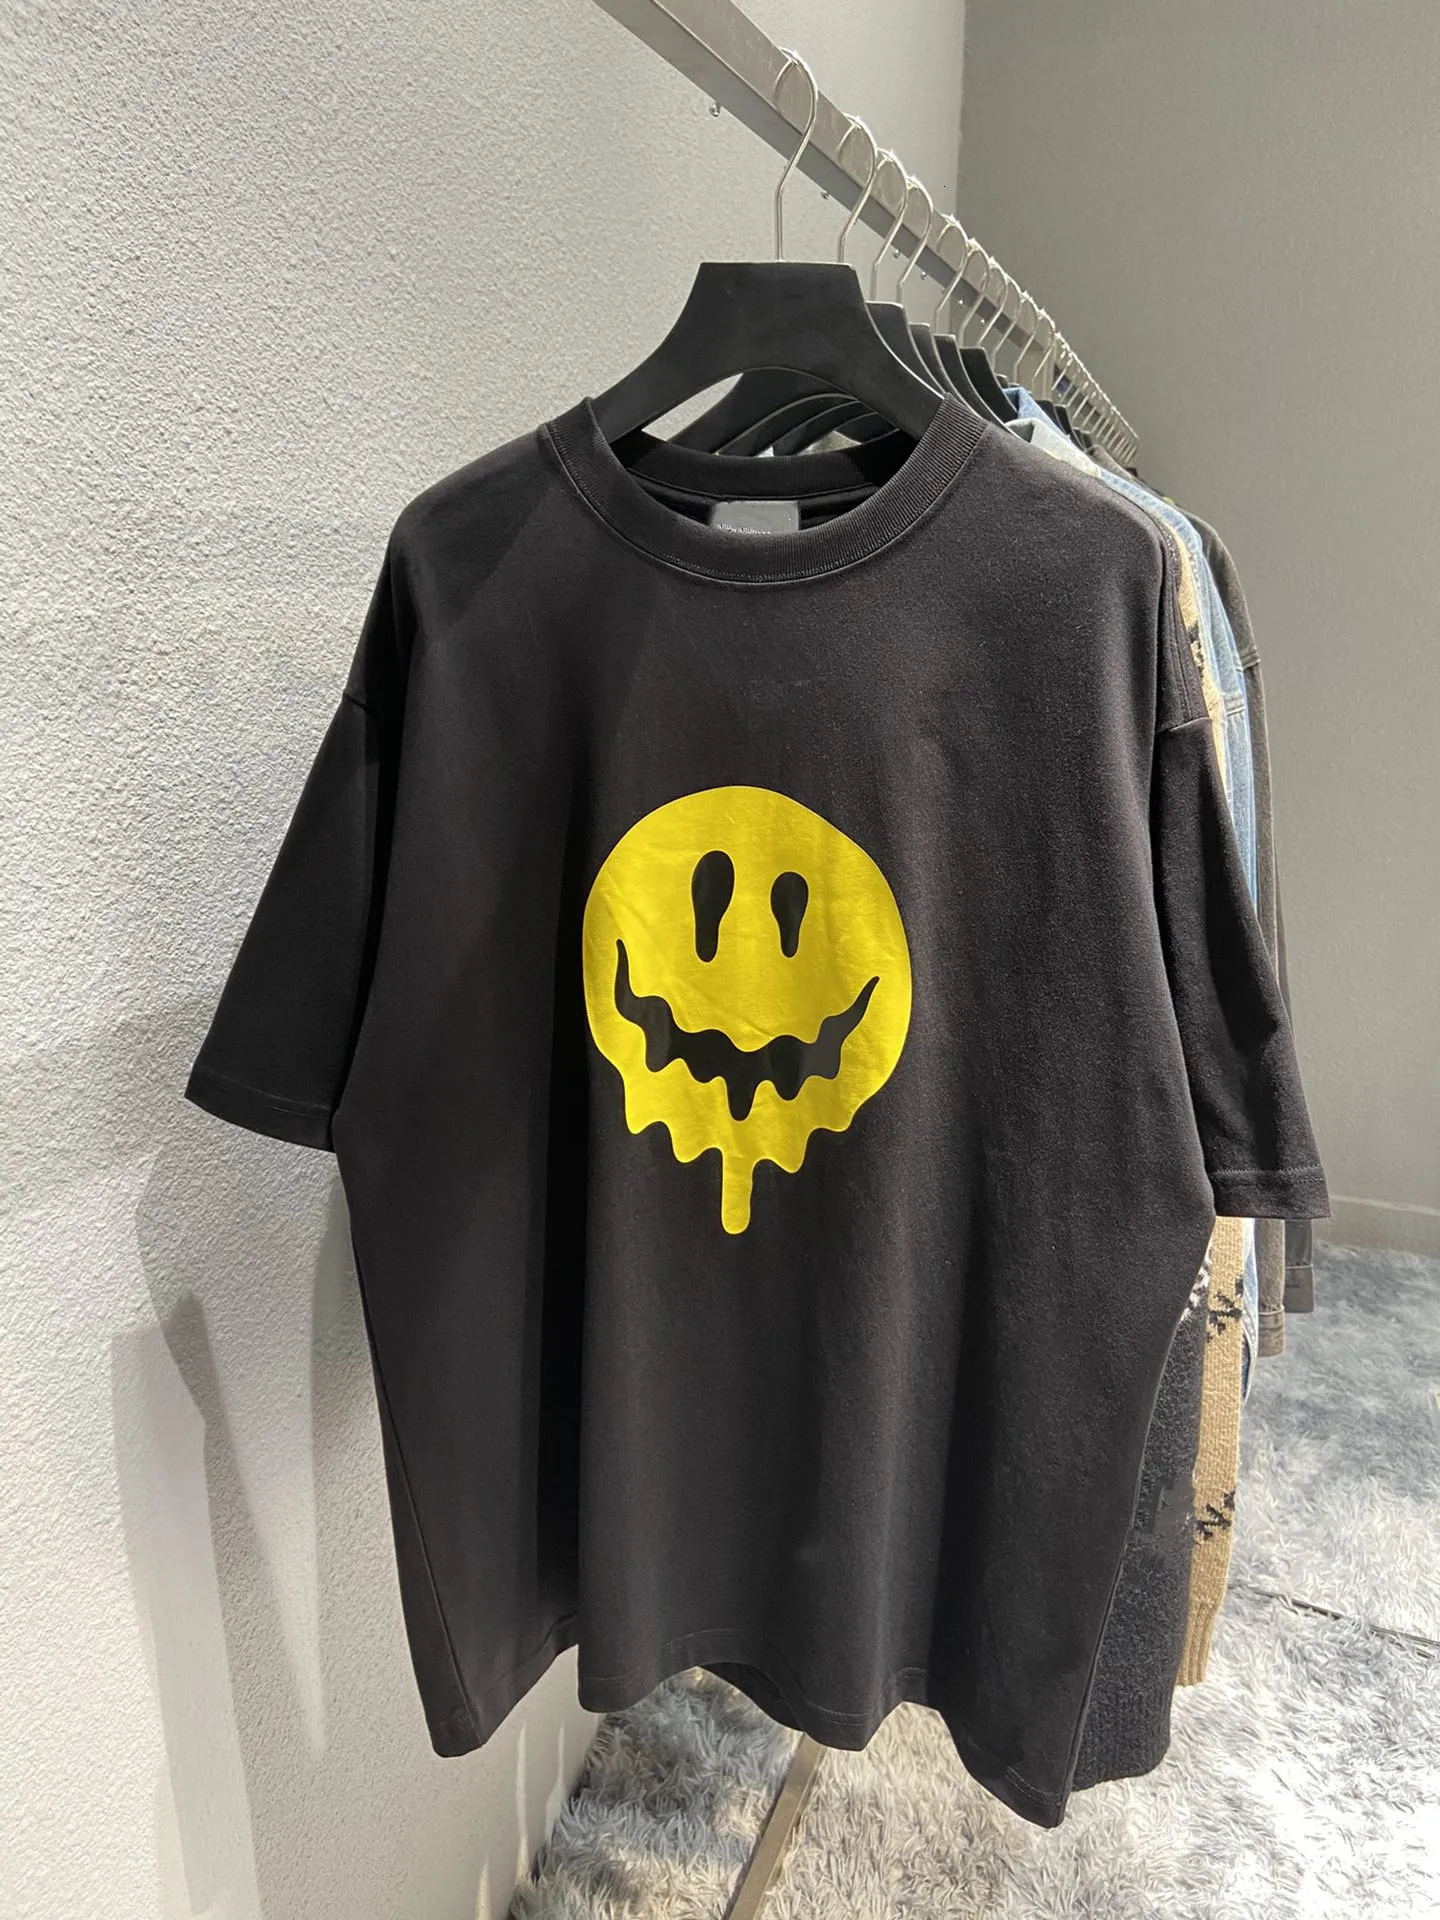 Women's T-Shirt designer Spring and summer high version b family dissolved smiling face back embroidered Skull Gloves head round neck loose